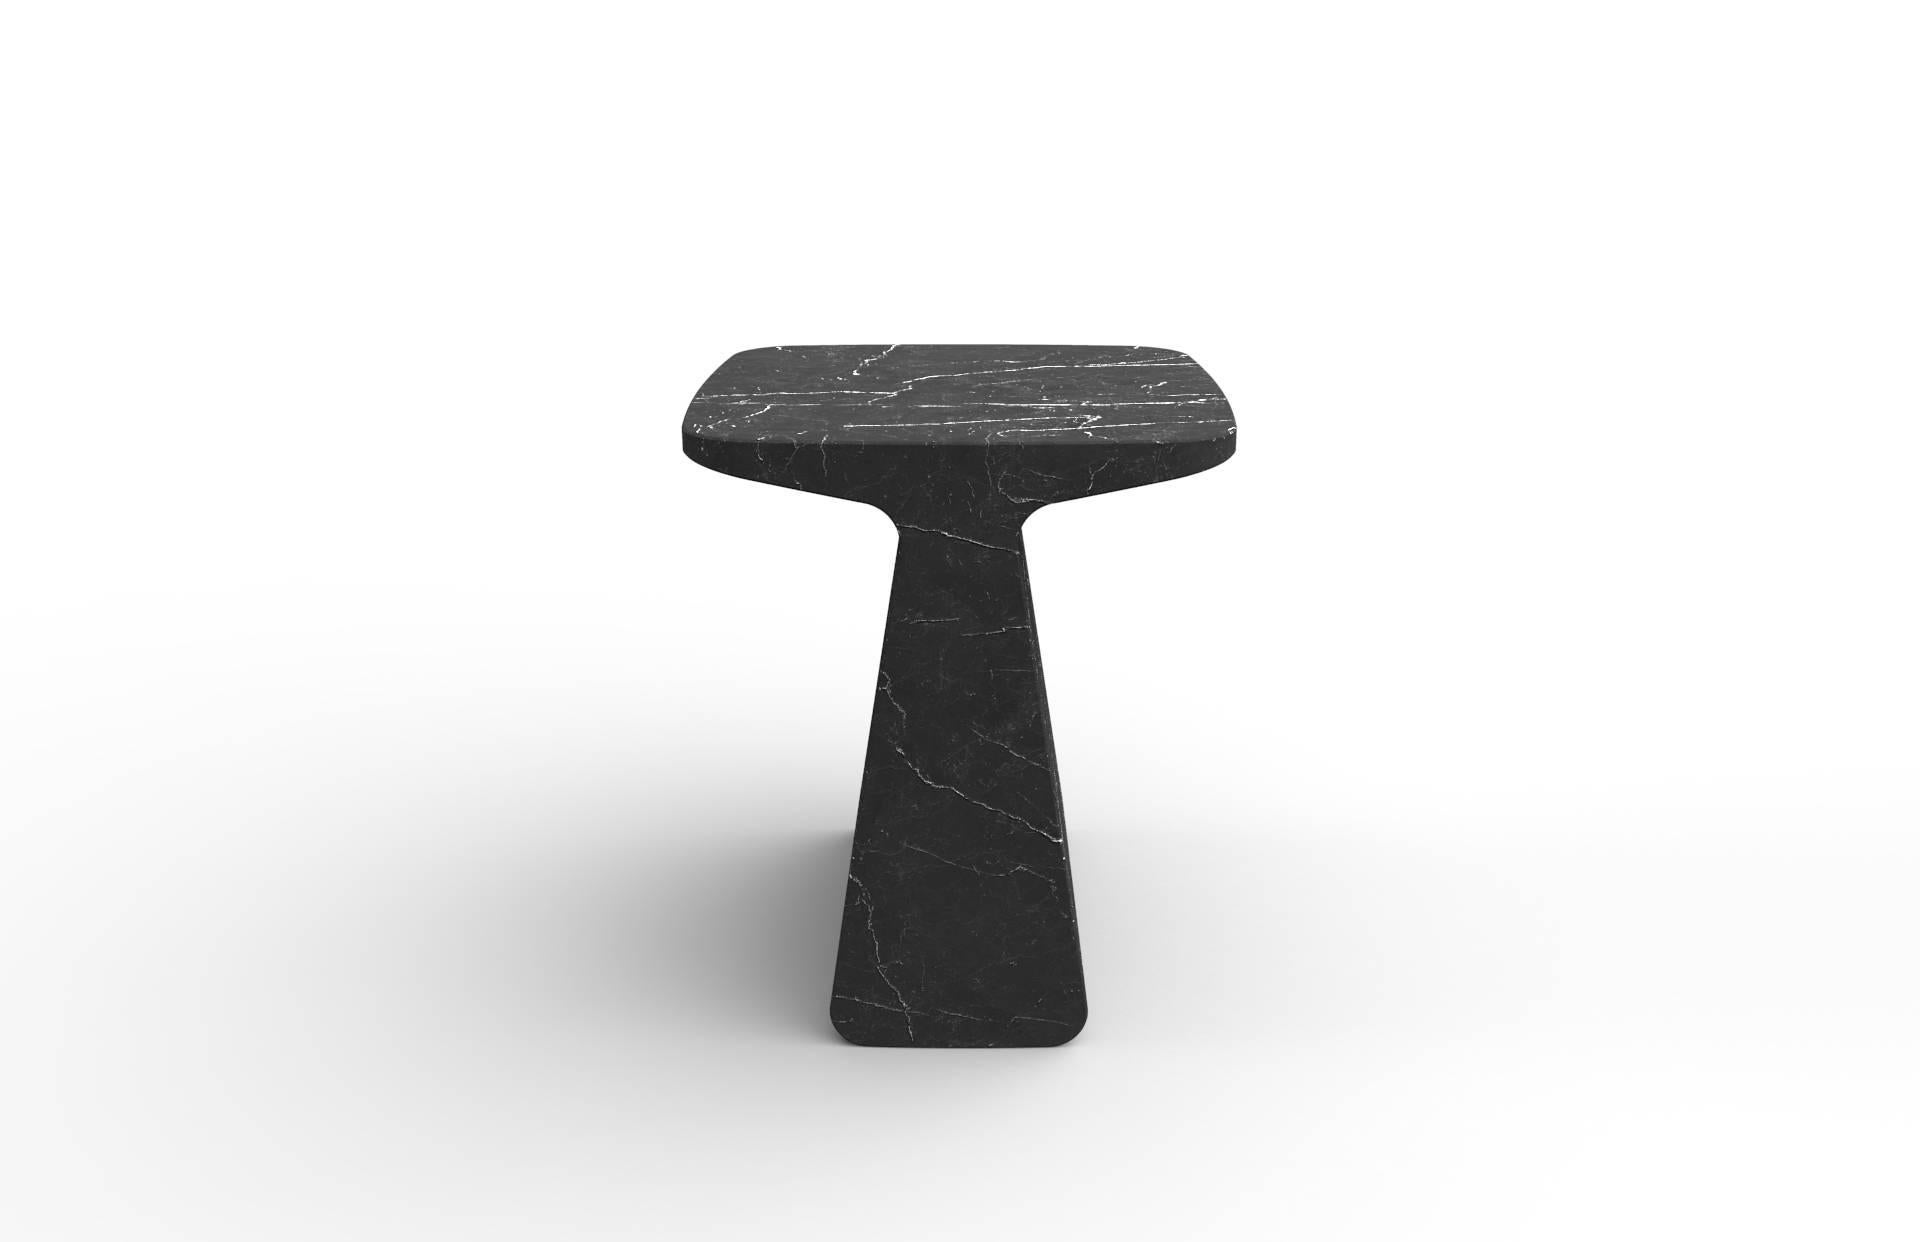 Pura is a side table extracted from a Marquina marble block. Solid and contained, either like a table, a base or a stool, Pura emanates presence and stillness. It's available in white and black marble and its finish is matte.

Side table designed